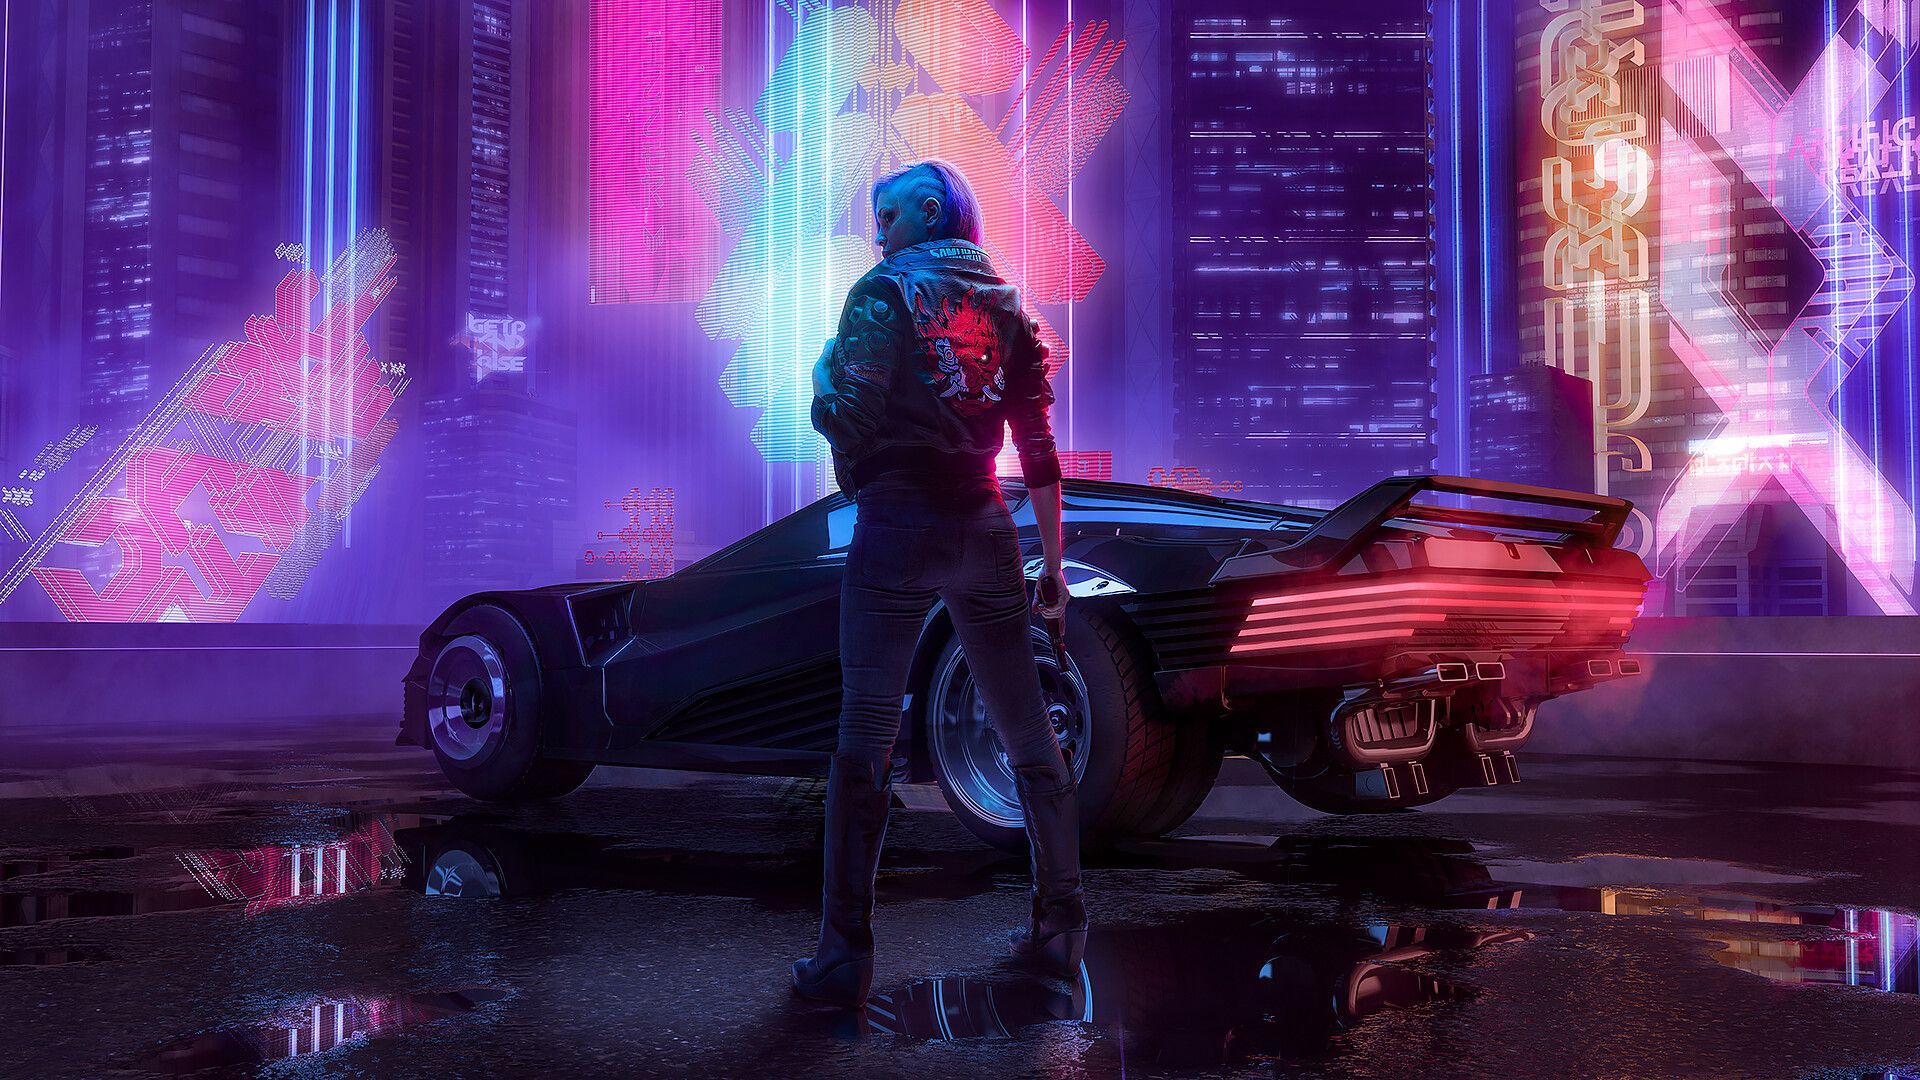 Cyberpunk 2077 Girl Art, HD Games, 4k Wallpaper, Image, Background, Photo and Picture